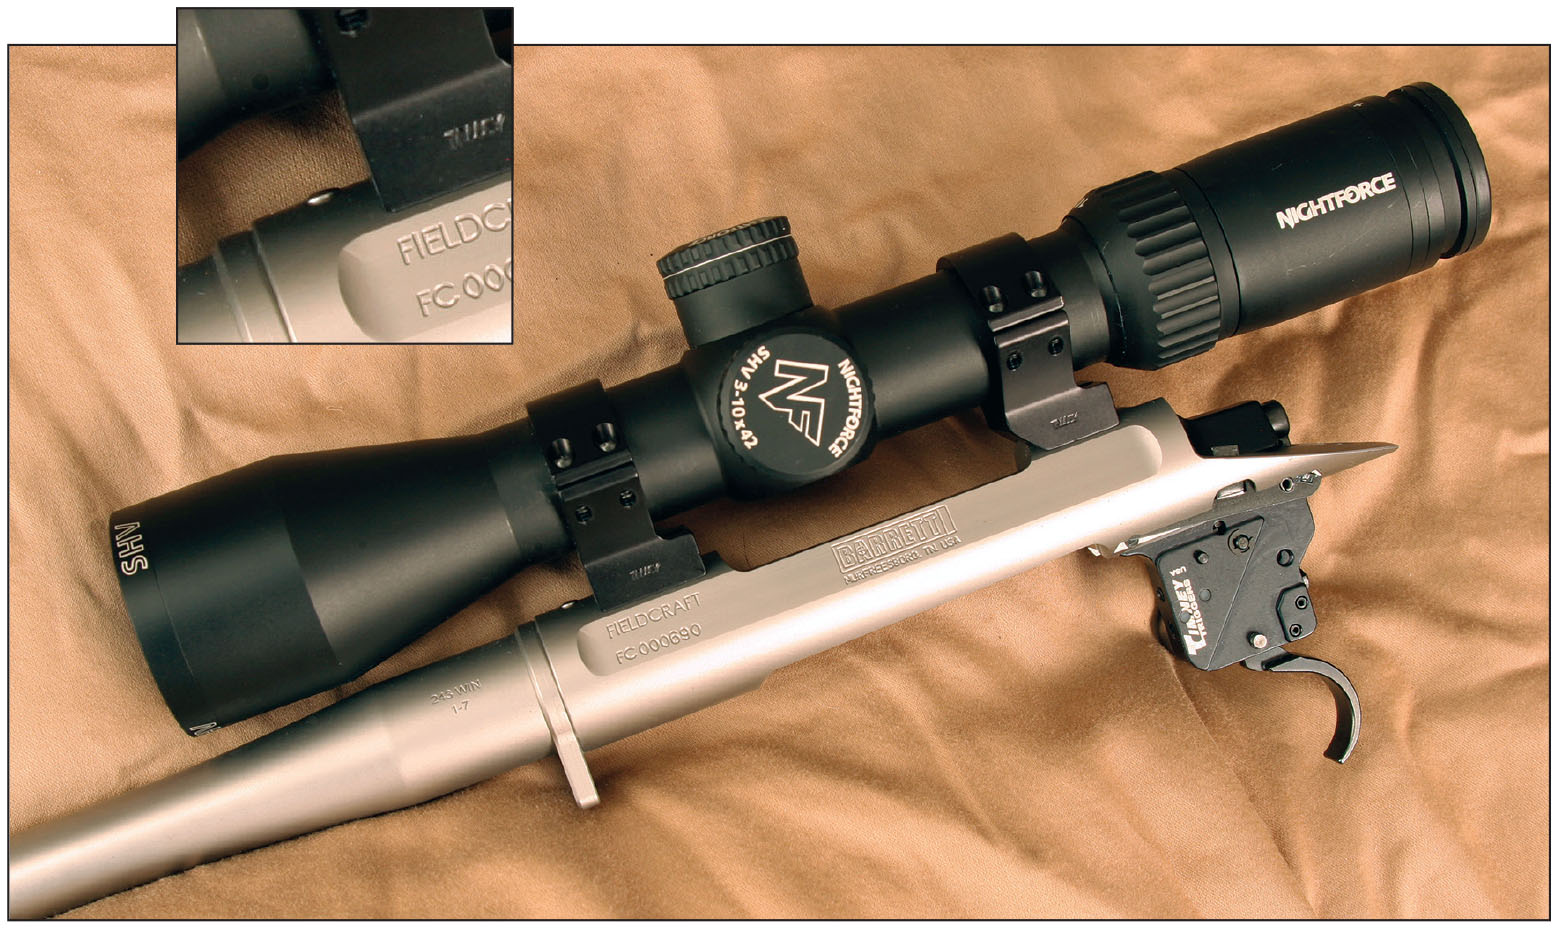 A third scope-mounting hole in the receiver ring (filler screw visible in inset photo) allows flexibility in mounting scopes of various lengths, such as a Nightforce SHV 3-10x 42mm. The Timney trigger has a two-position safety.